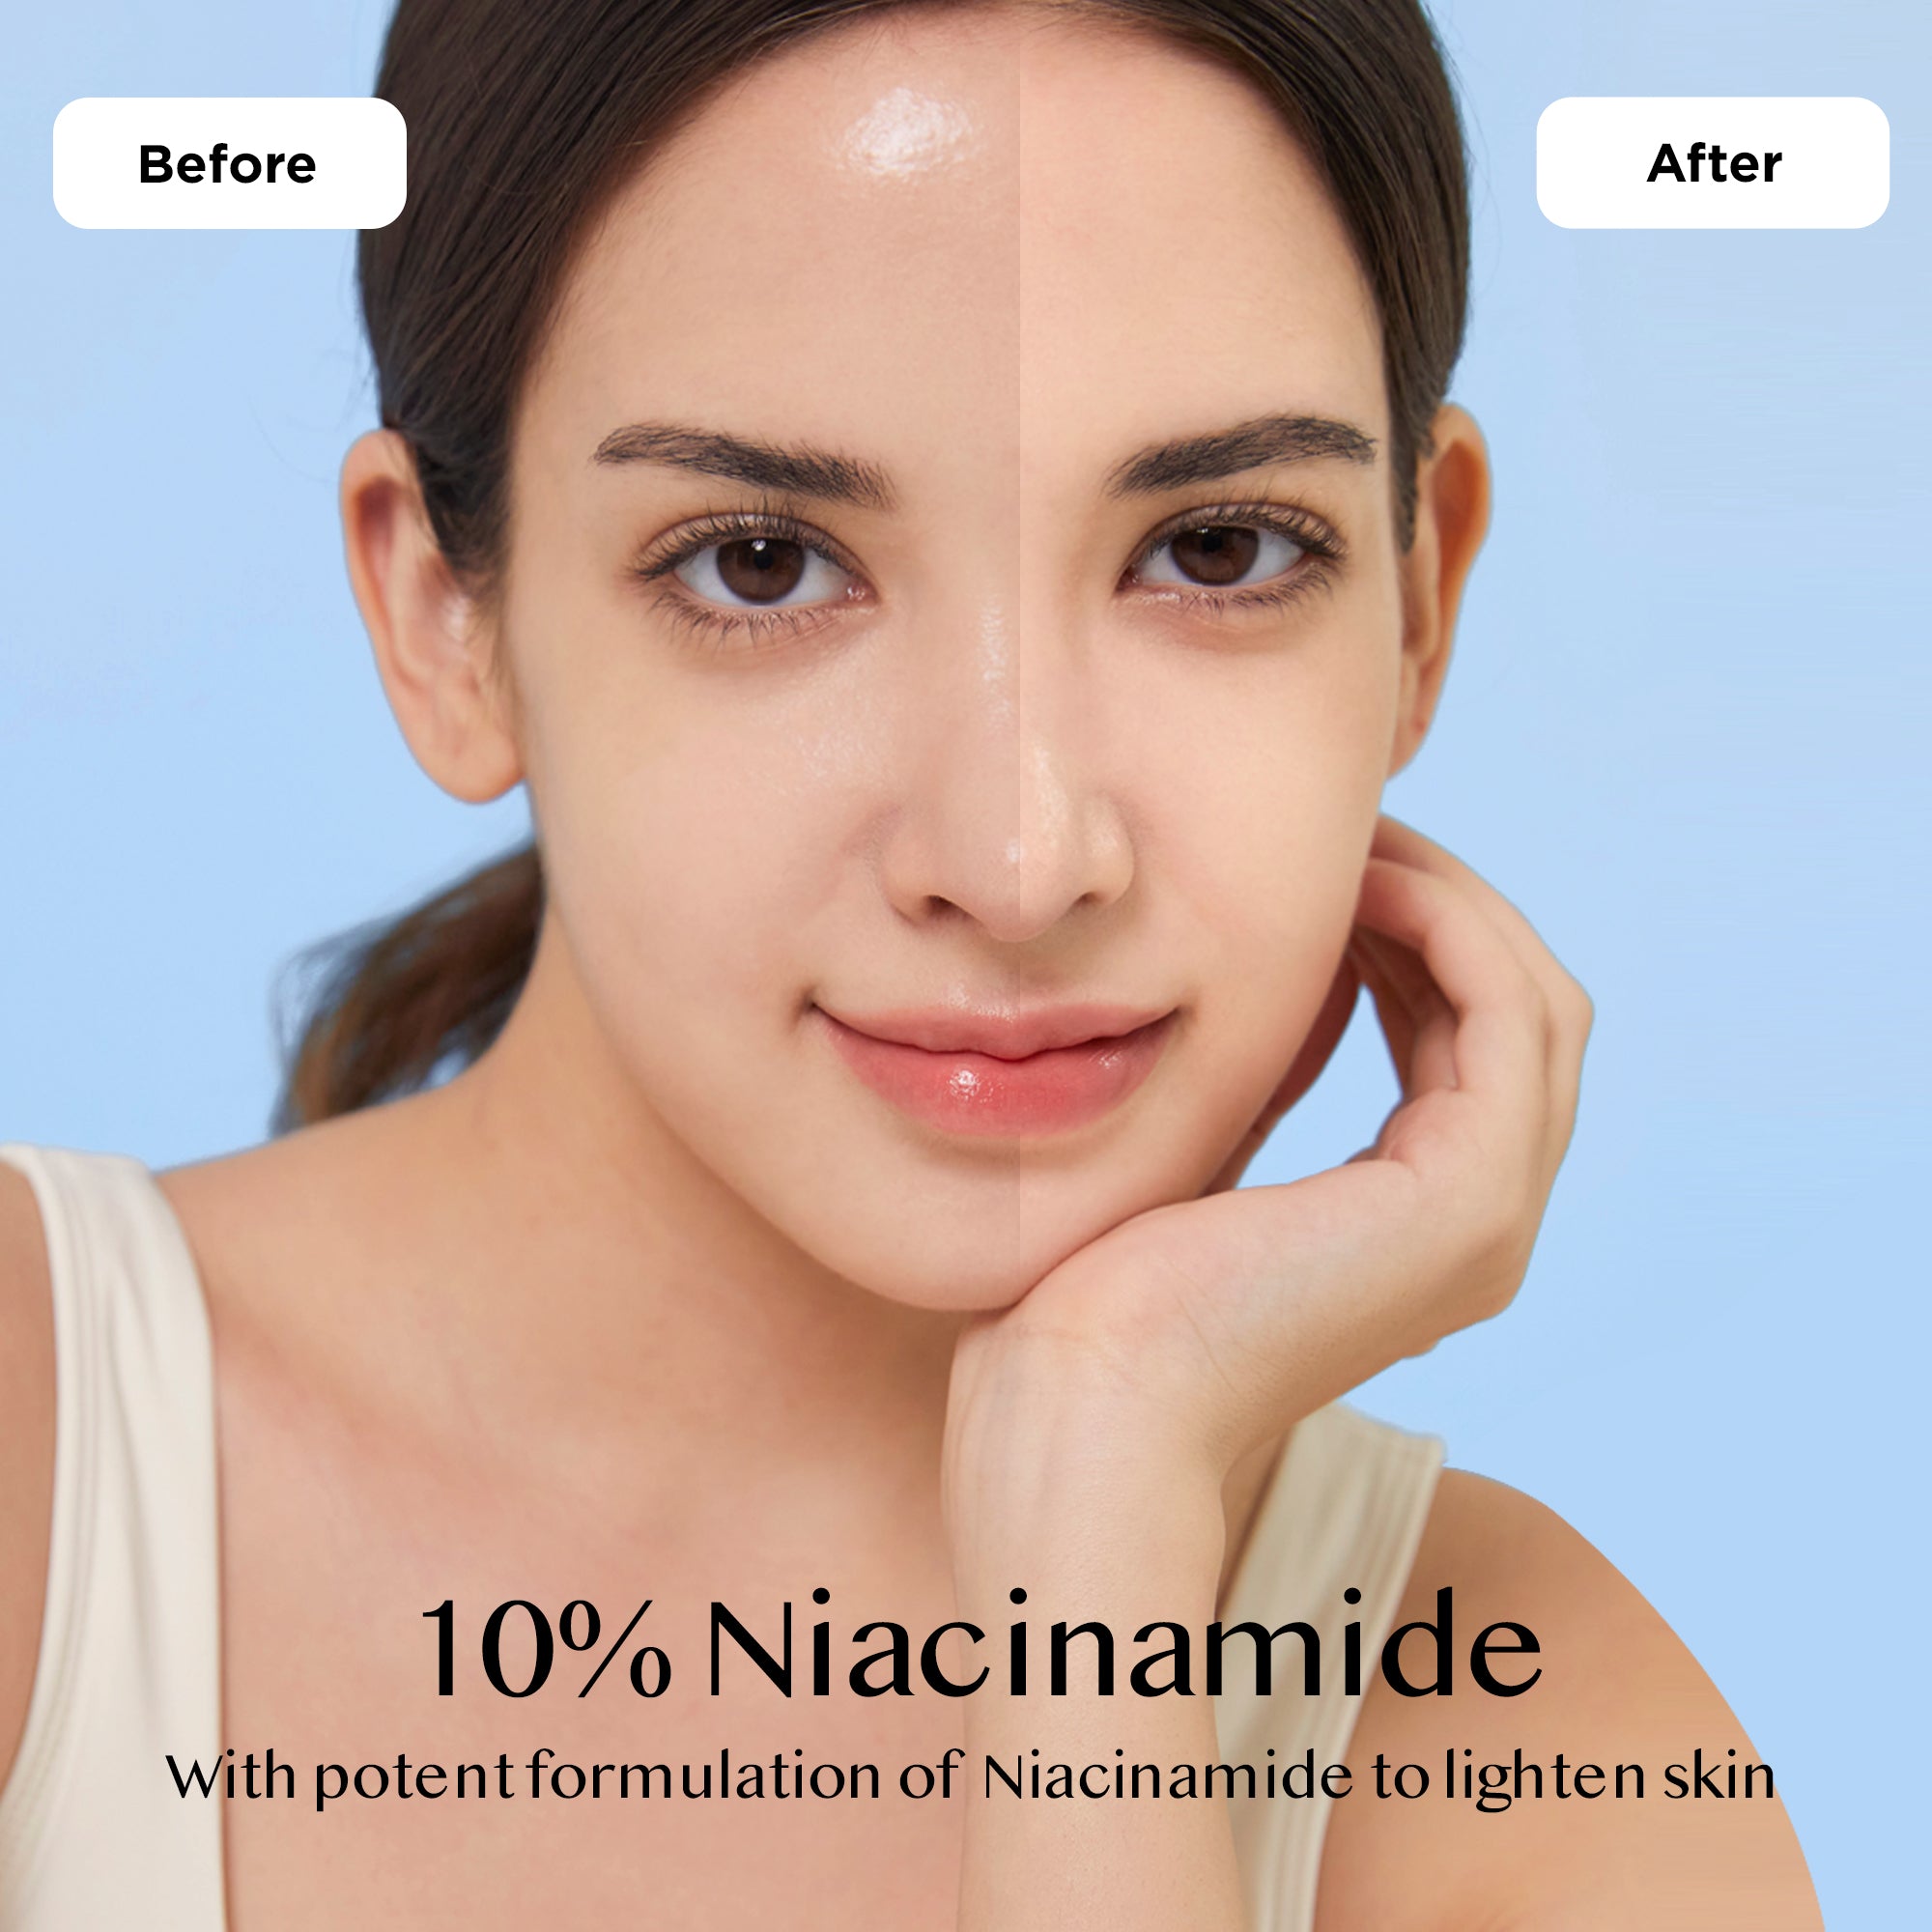 Comparison of skin appearance before and after using Avarelle's 10% Niacinamide Brightening Complex that restores & nourishes skin while lightening it.